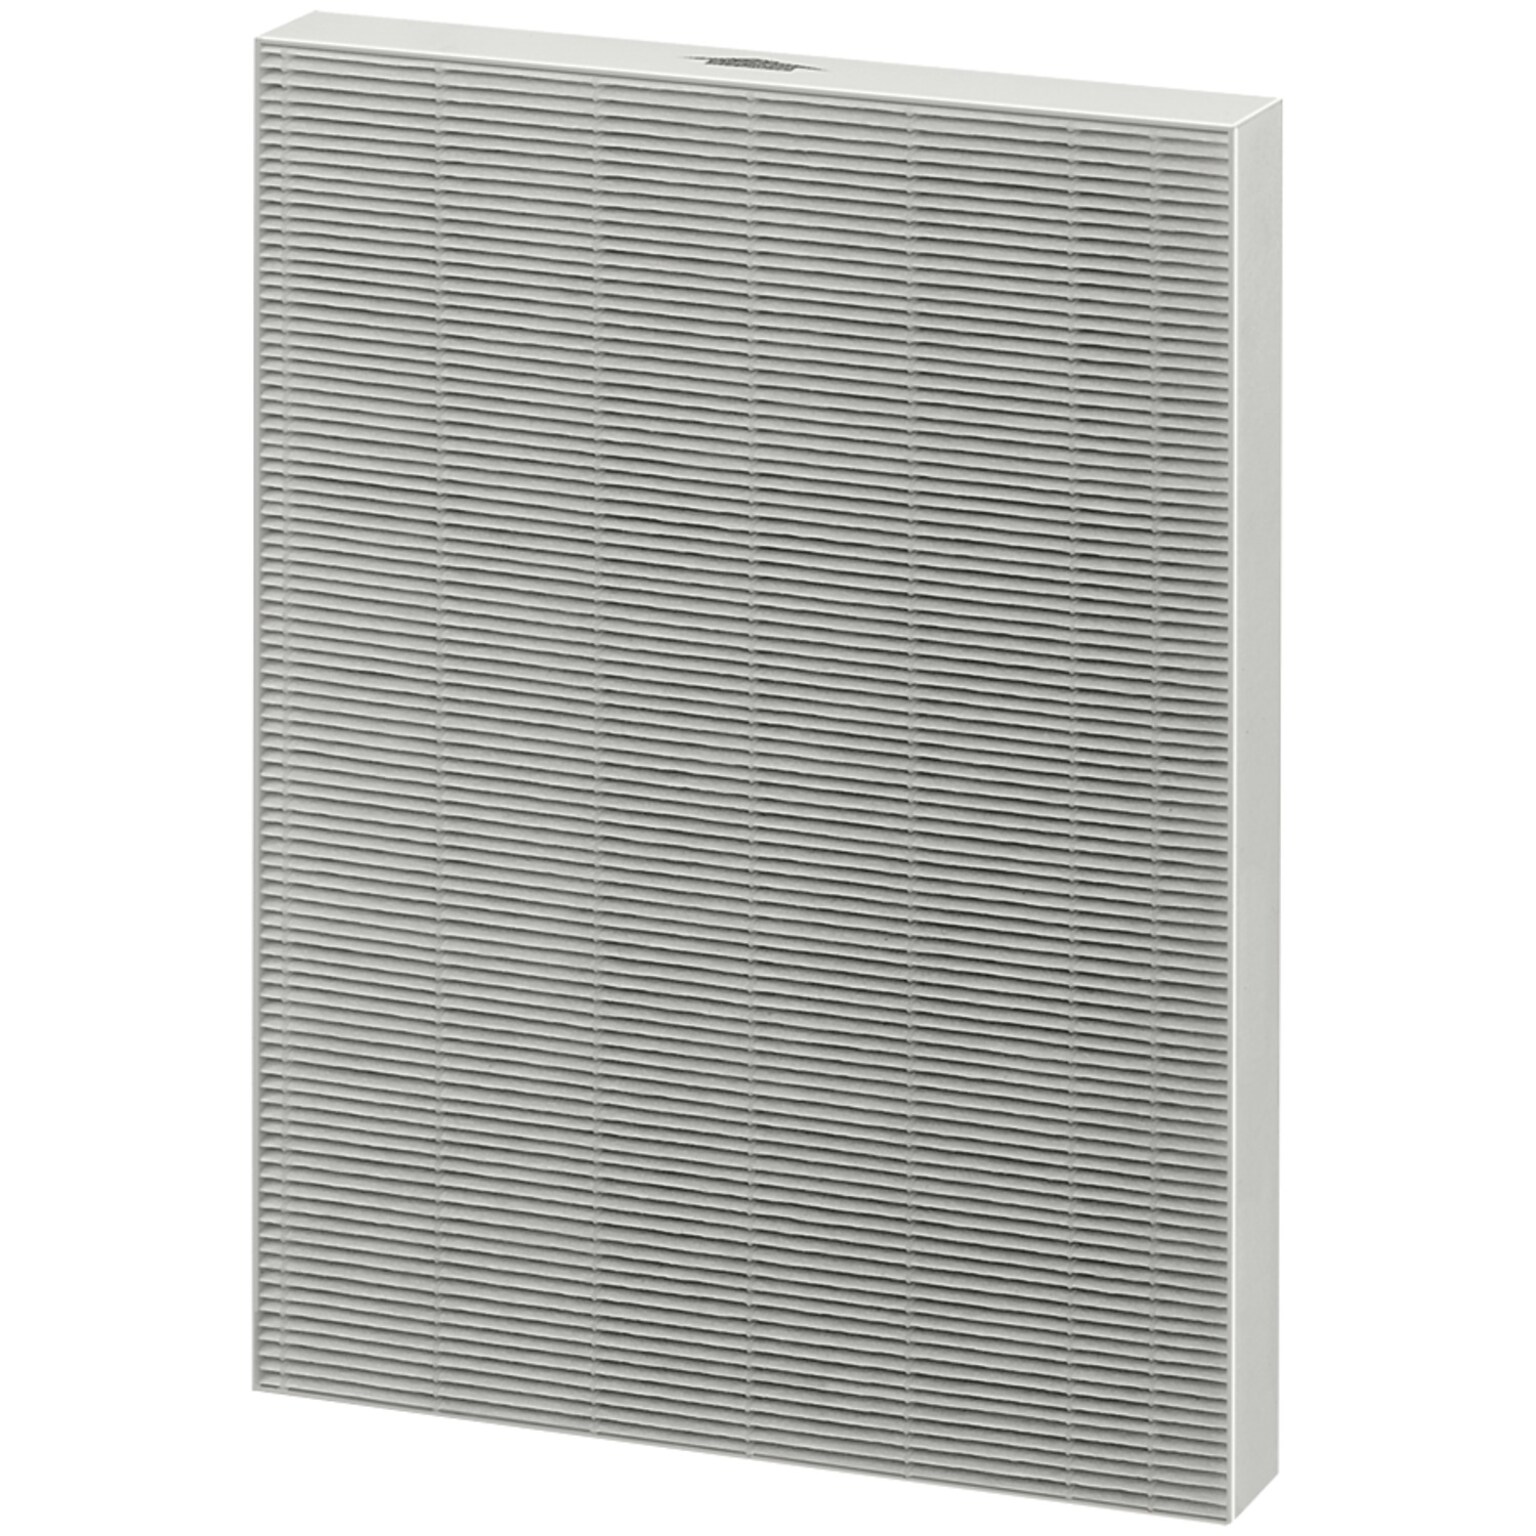 Fellowes 9287201 True Hepa Filter With Aerasafe Treatment (FLW9287201DS)